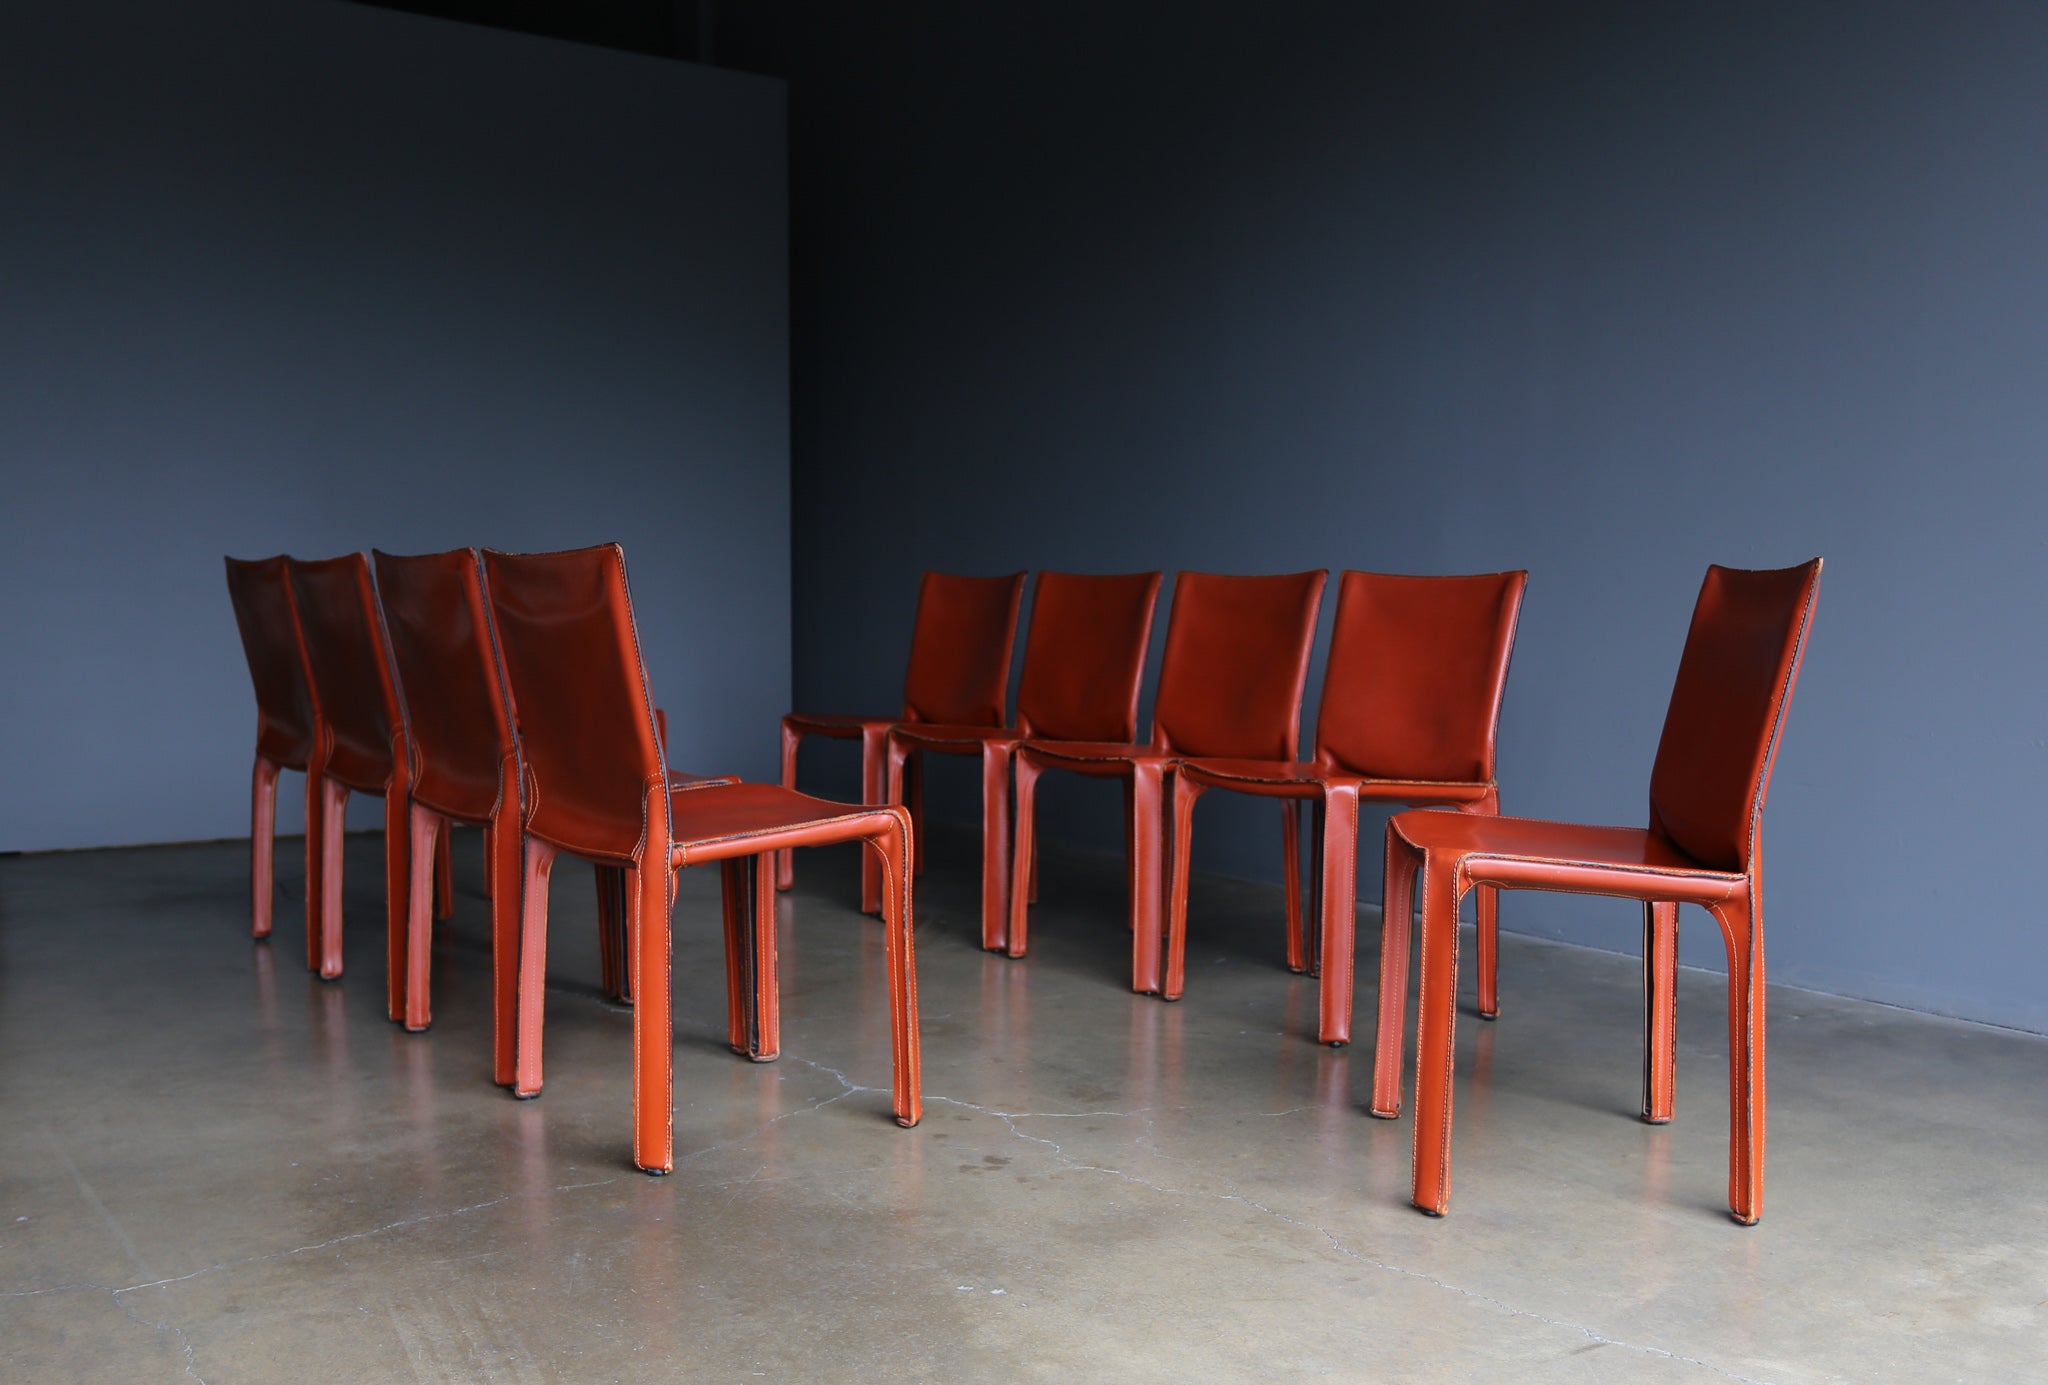 = SOLD = Mario Bellini Leather "Cab" Chairs for Cassina, circa 1980